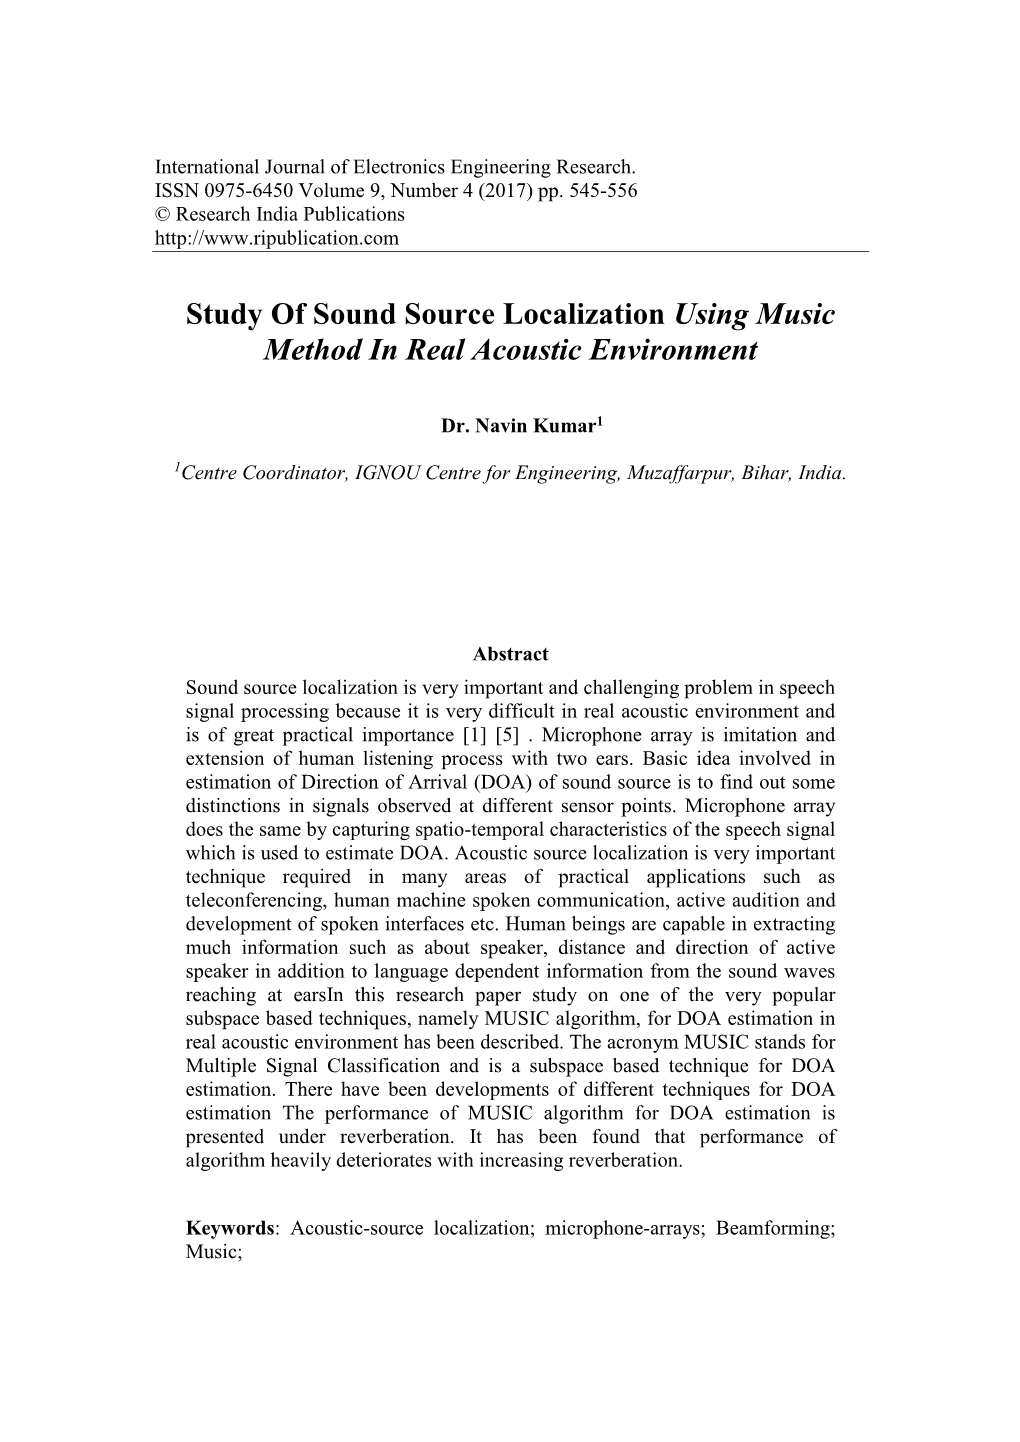 Study of Sound Source Localization Using Music Method in Real Acoustic Environment